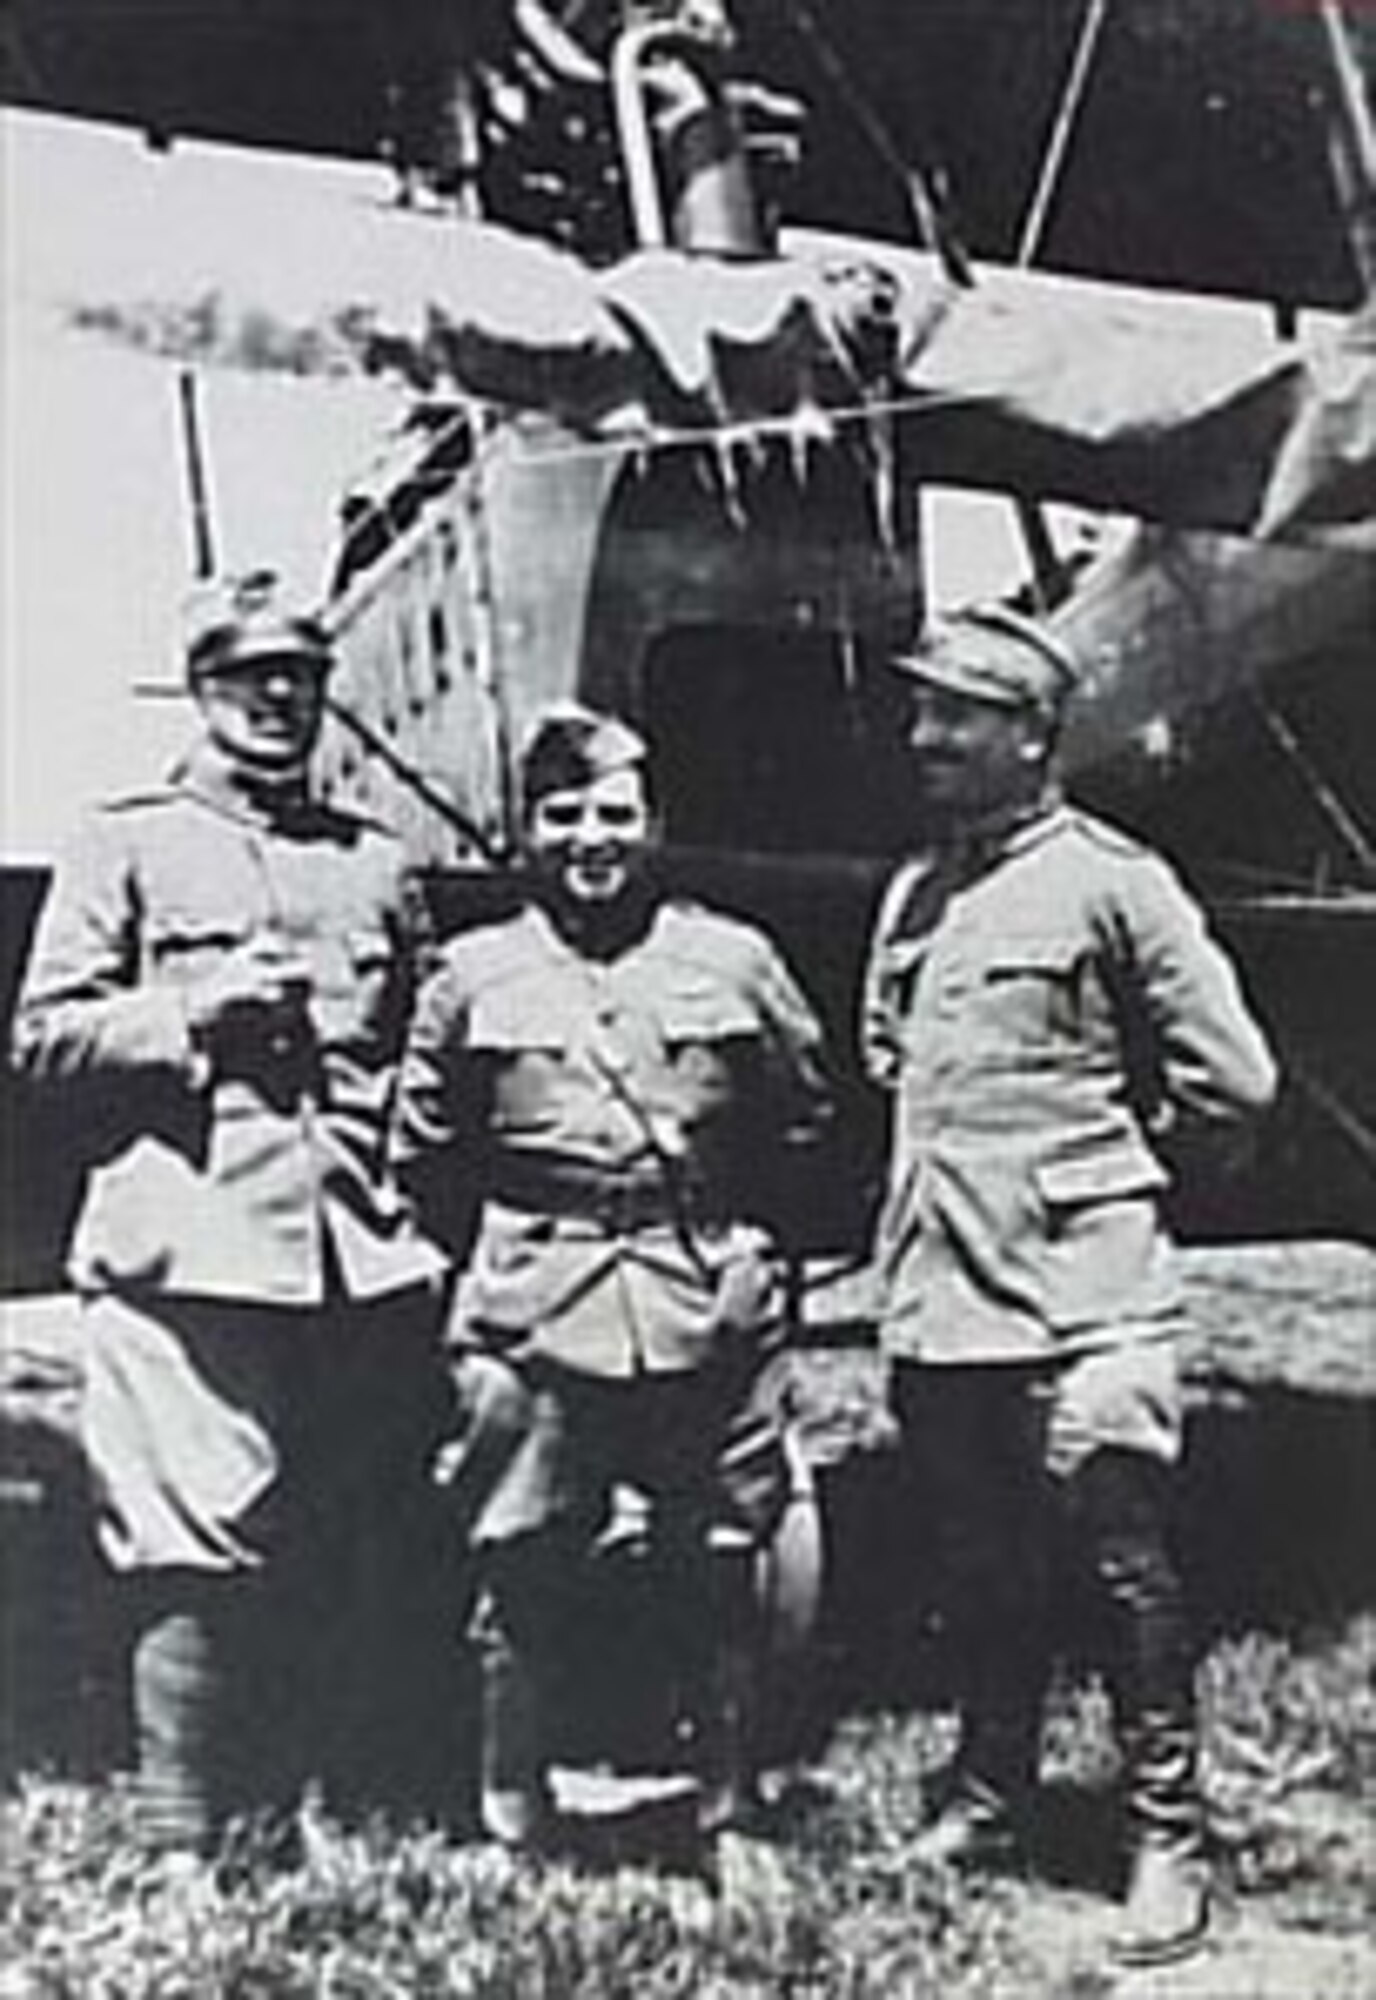 Maj. Fiorello H. La Guardia, standing between two Italian officers, was in command of U.S. Air Service personnel in Italy. La Guardia later gained fame as the mayor of New York City from 1933-1945. (U.S. Air Force photo)